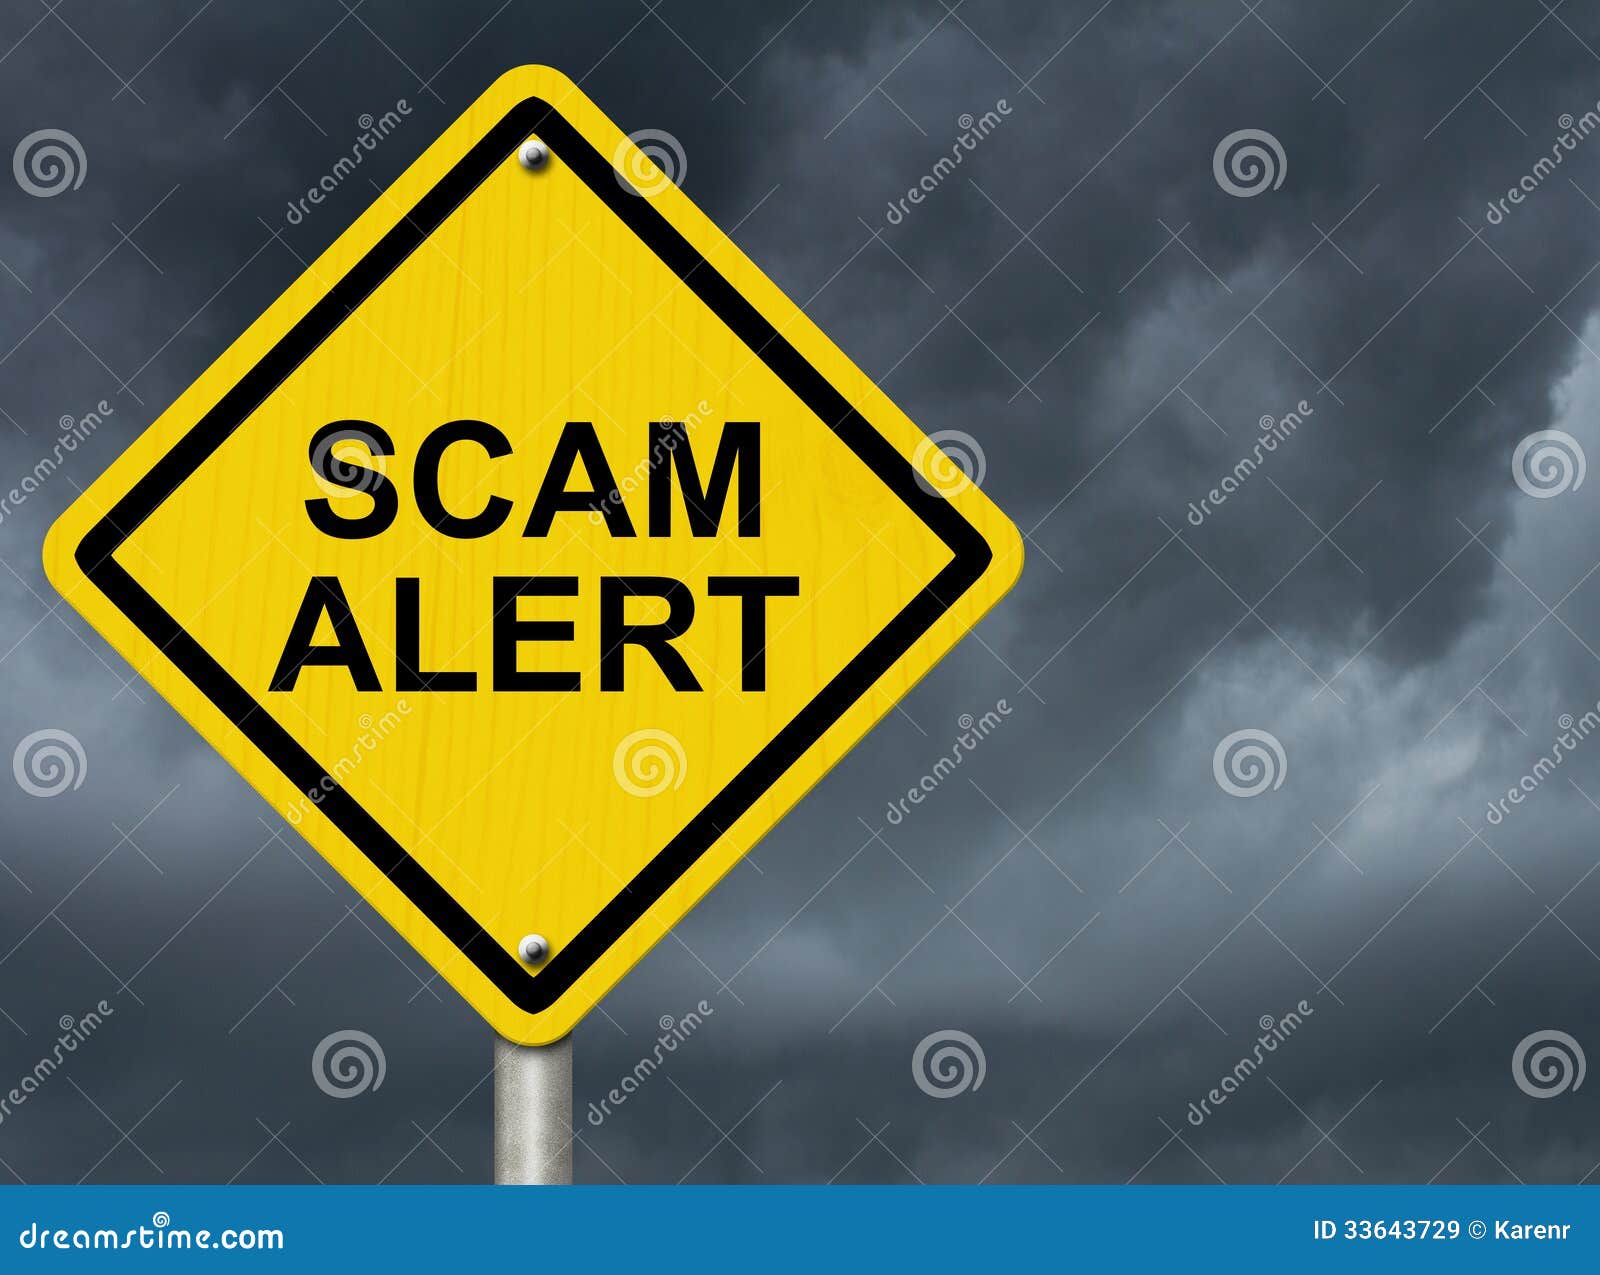 warning of scam